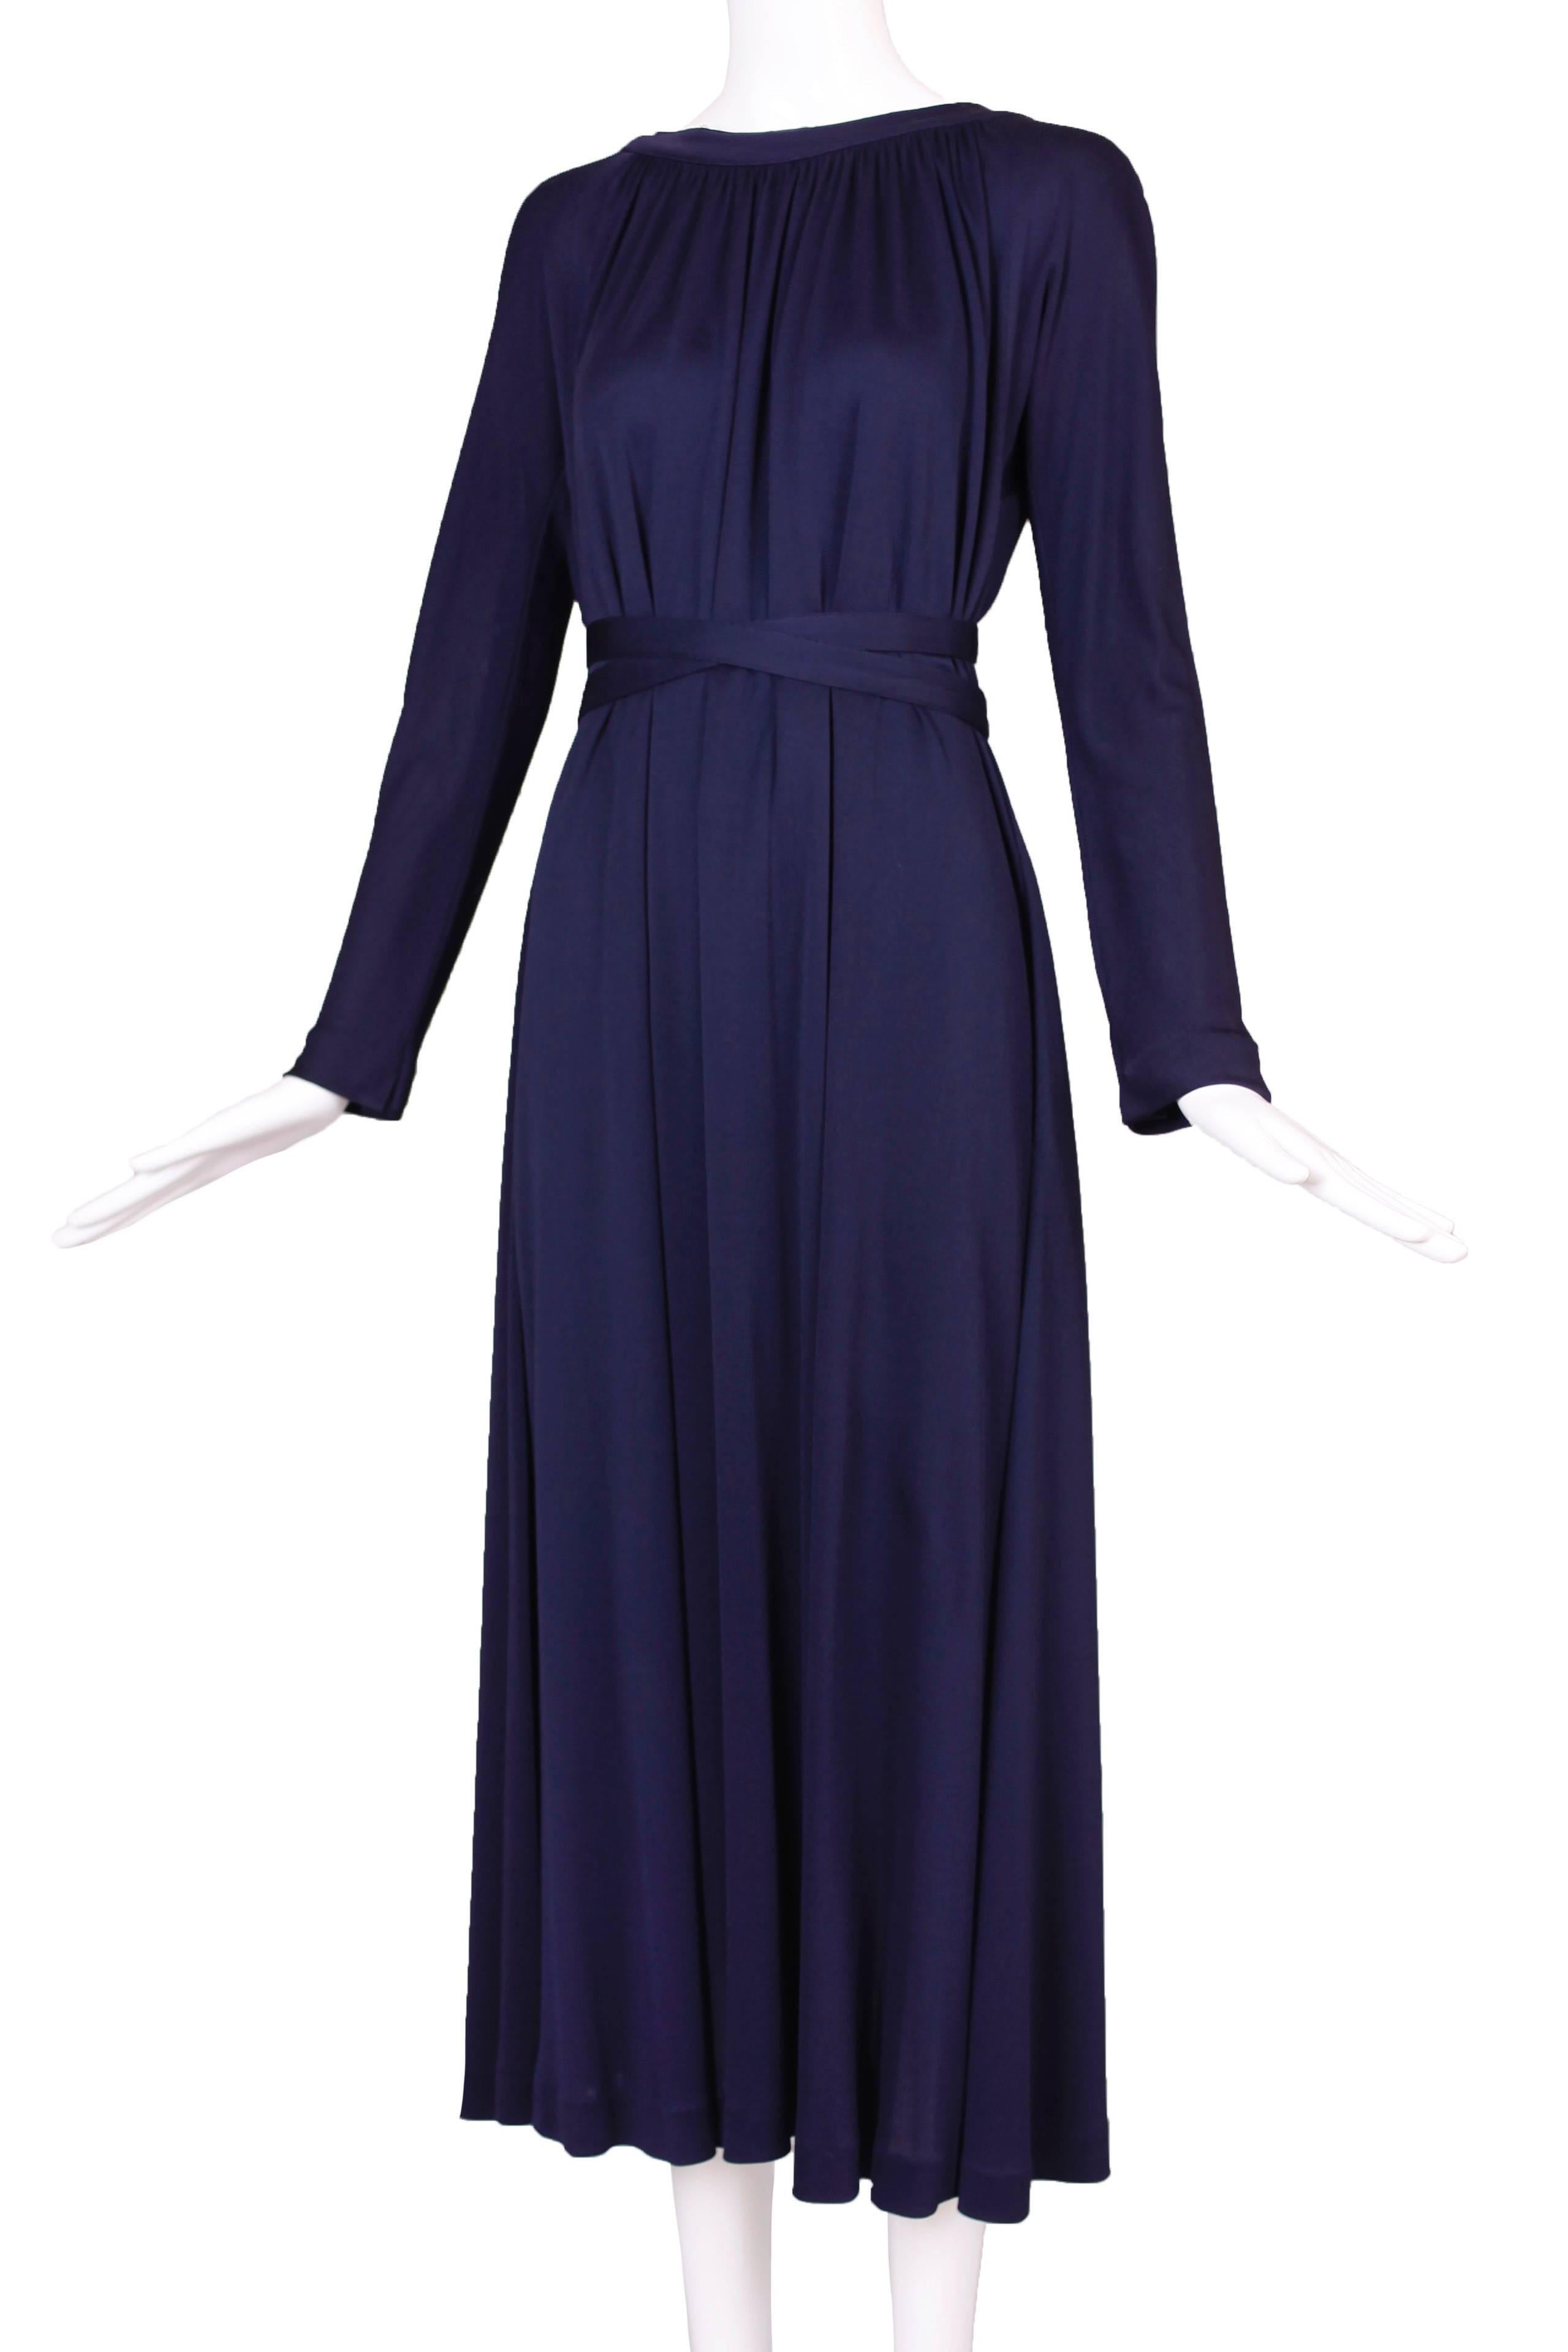 1970’s Geoffrey Beene for Saks Fifth Avenue midnight blue silk jersey dress with a gathered neckline and two long ties attached at the back that wrap around as a belt and two hidden side pockets. In very good to excellent condition with a small